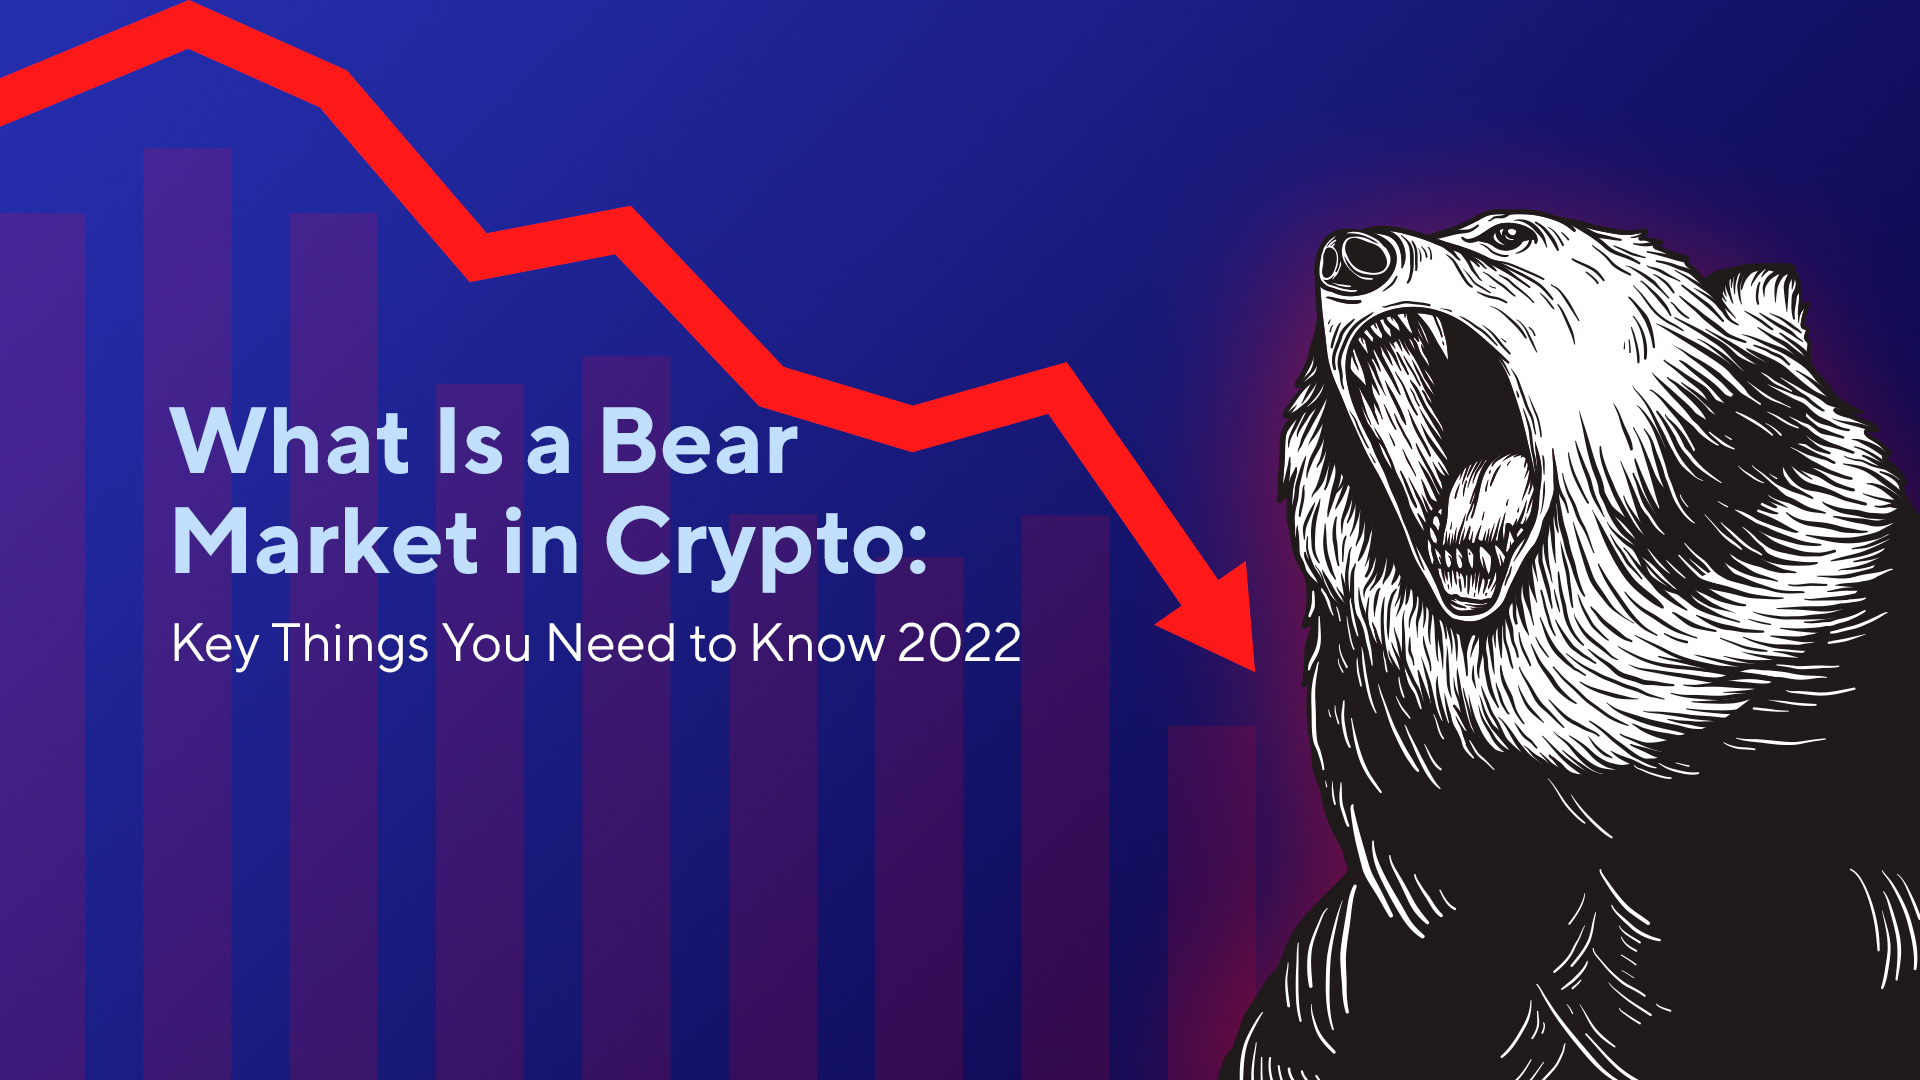 What Is a Bear Market in Crypto: Key Things You Need to Know 2022